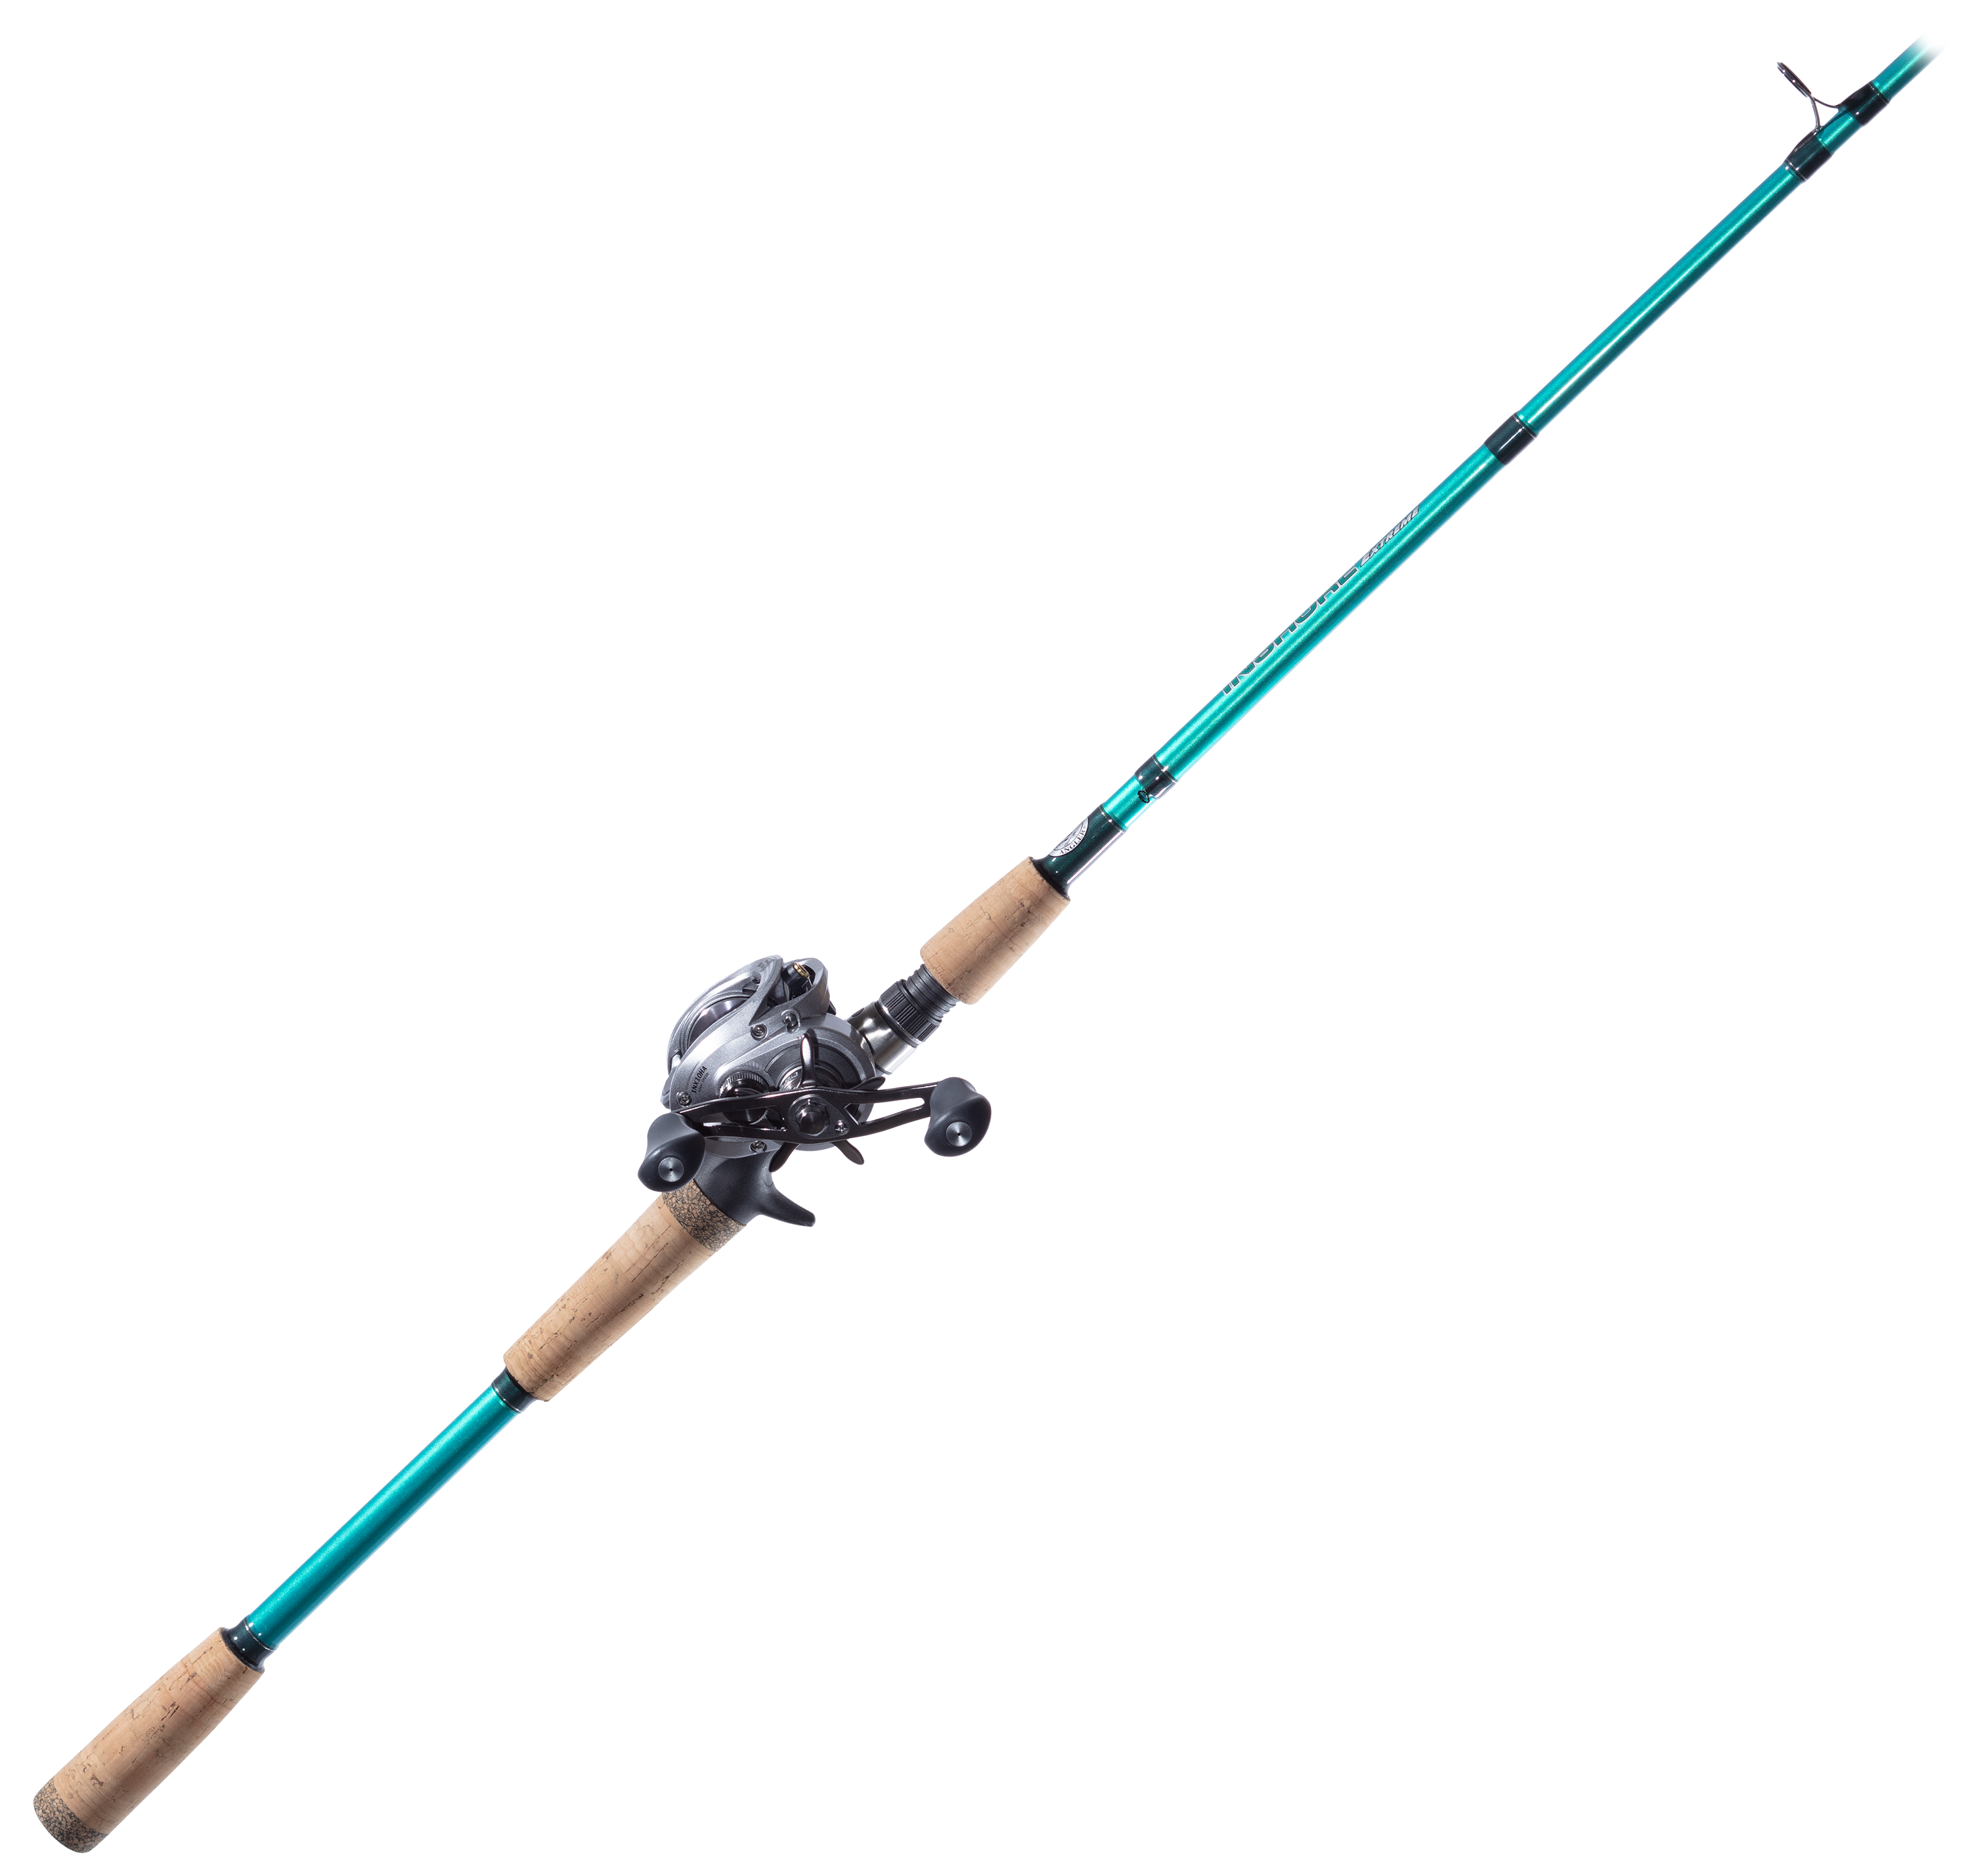 Offshore Angler Inshore Extreme Baitcast Rod and Reel Combo